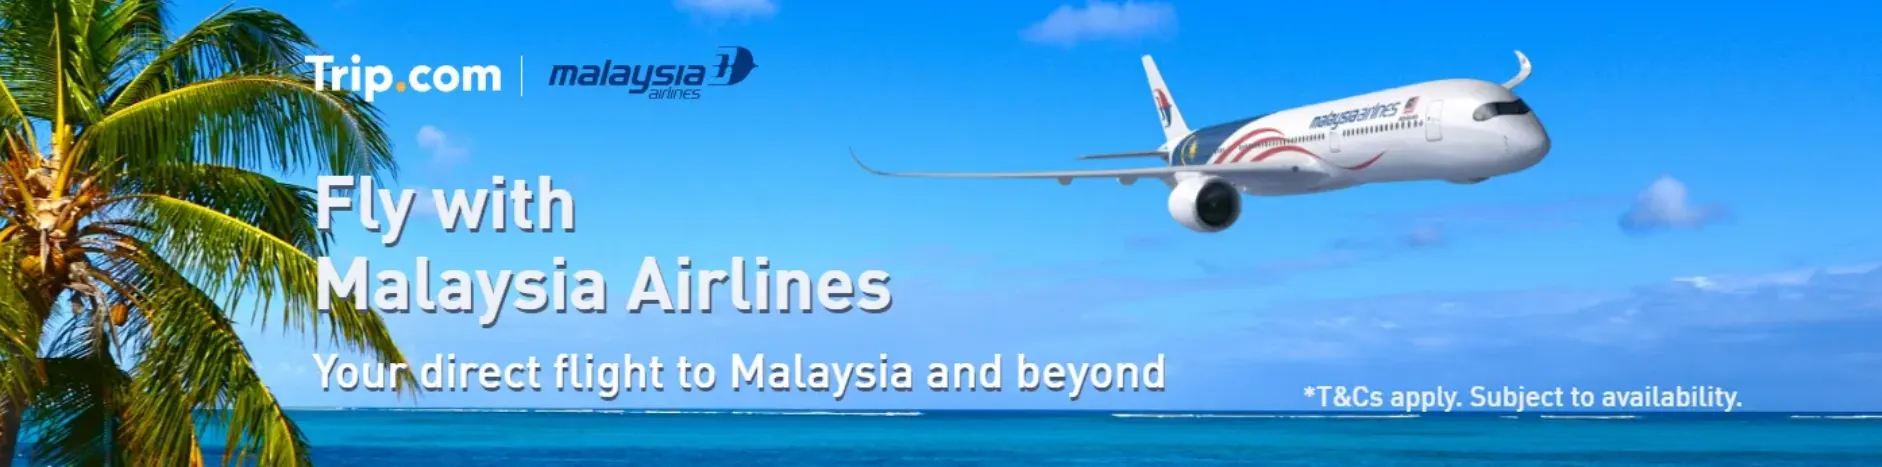 Trip.com Promo Code UK: Fly with Malaysia Airlines